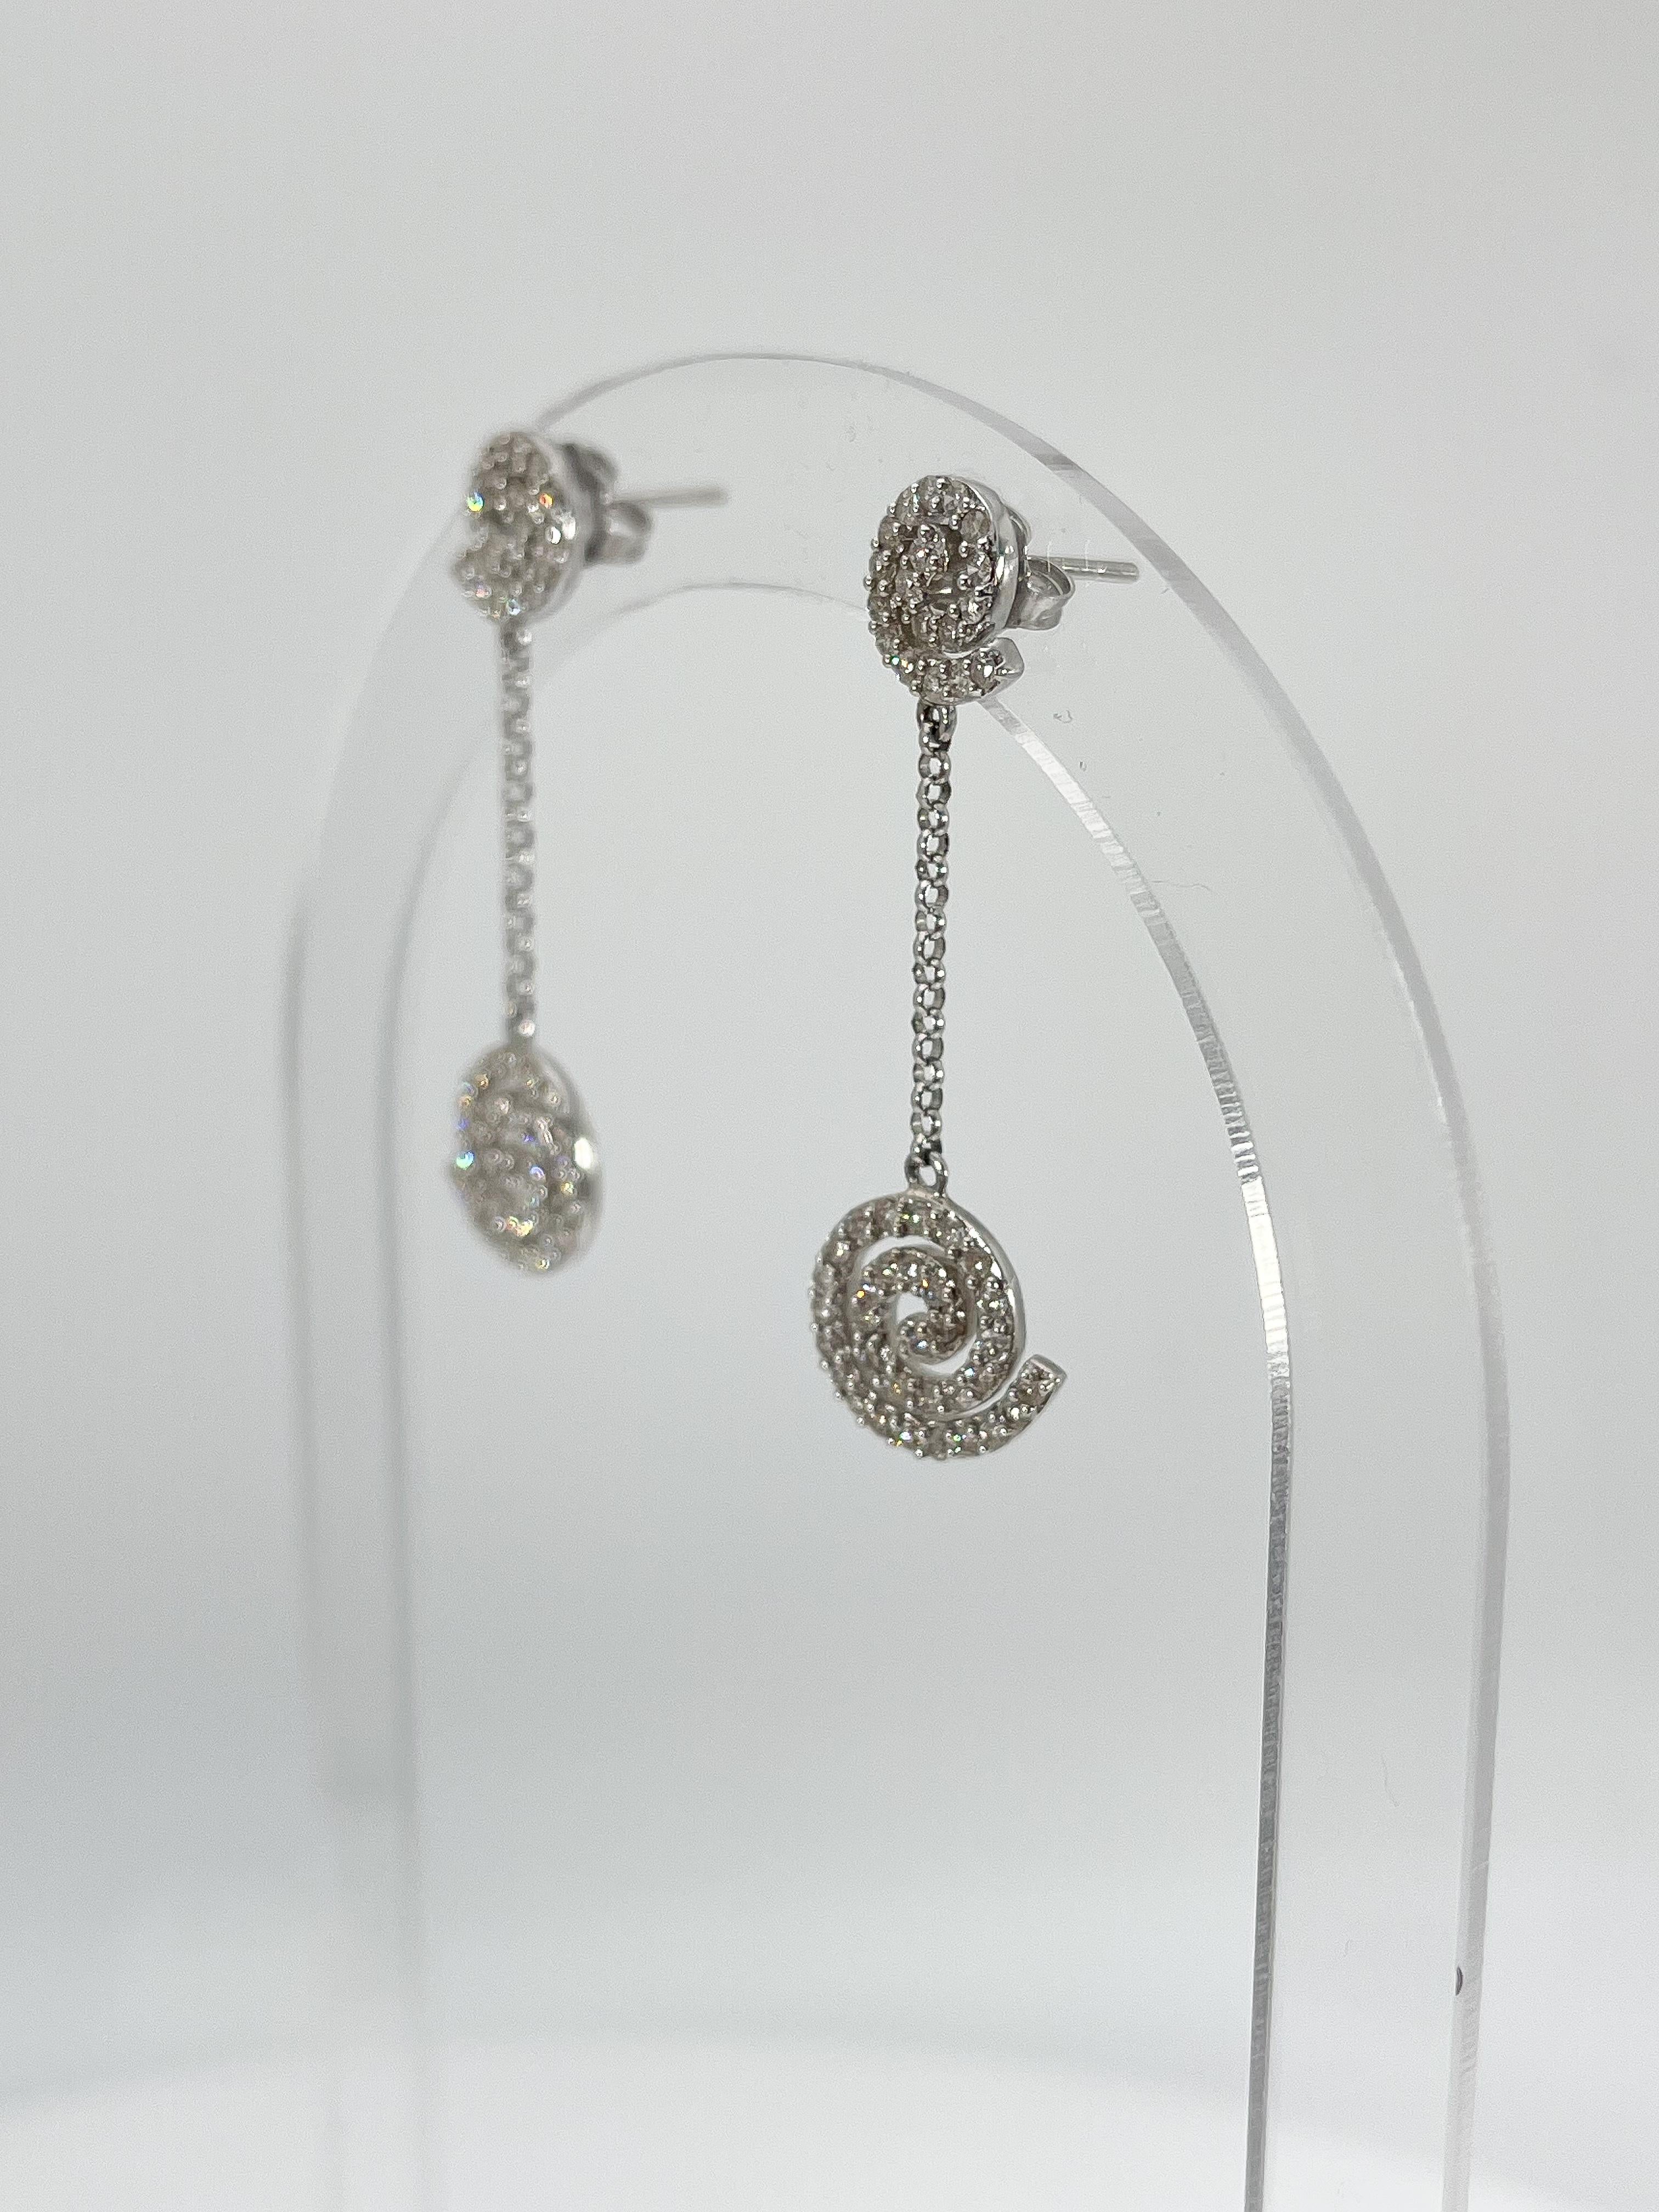 14K White Gold Circle Swirl 1.06 CTW Diamond Drop Earrings In Excellent Condition For Sale In Stuart, FL